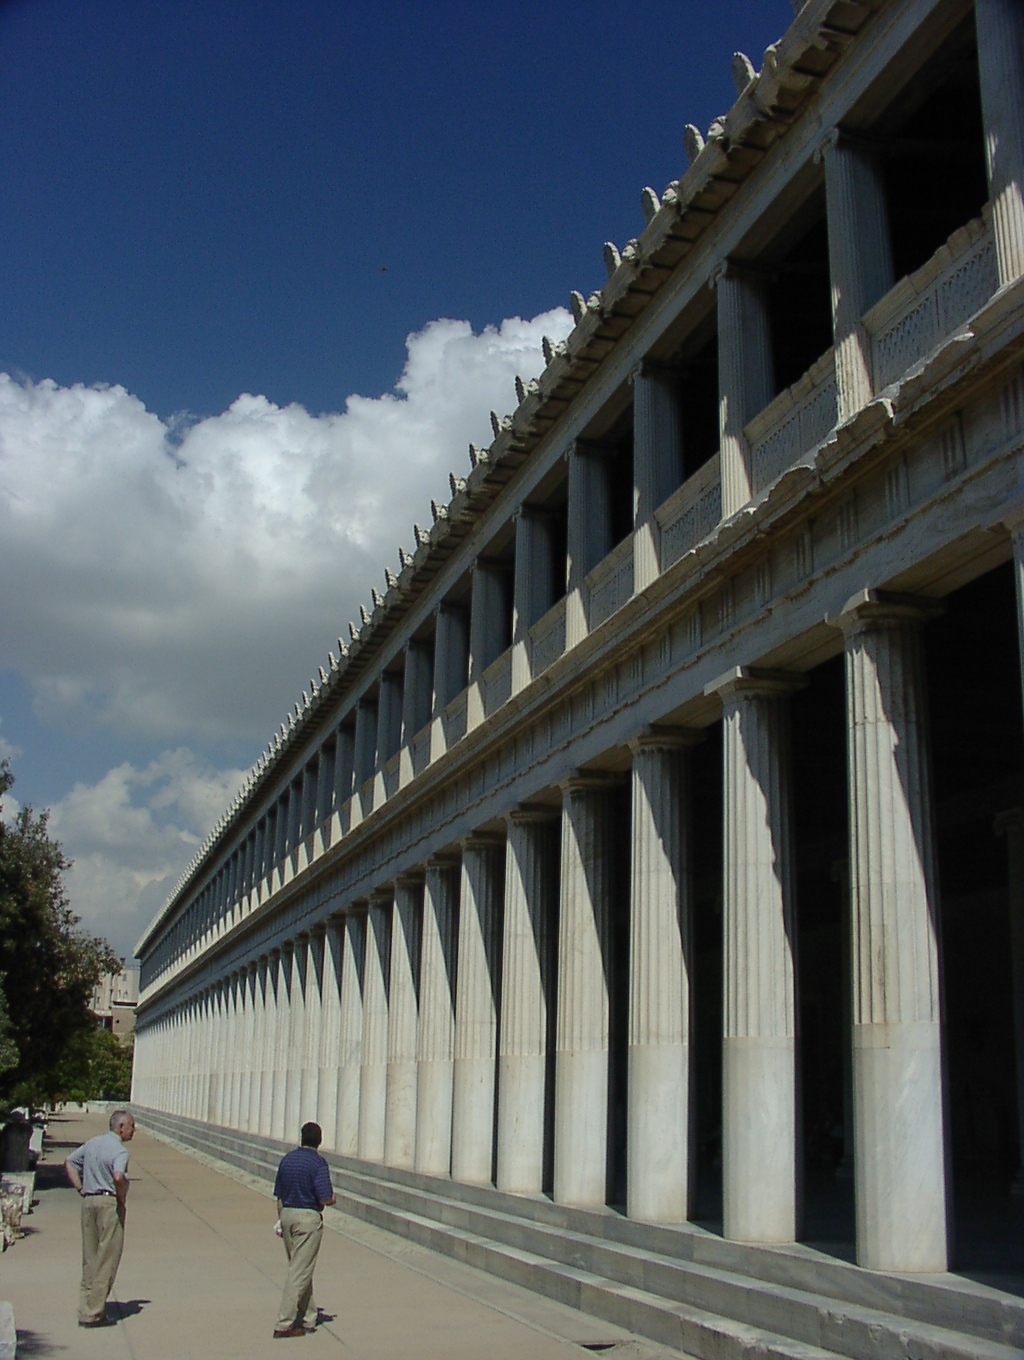 Stoa - Was Socrates executed here?